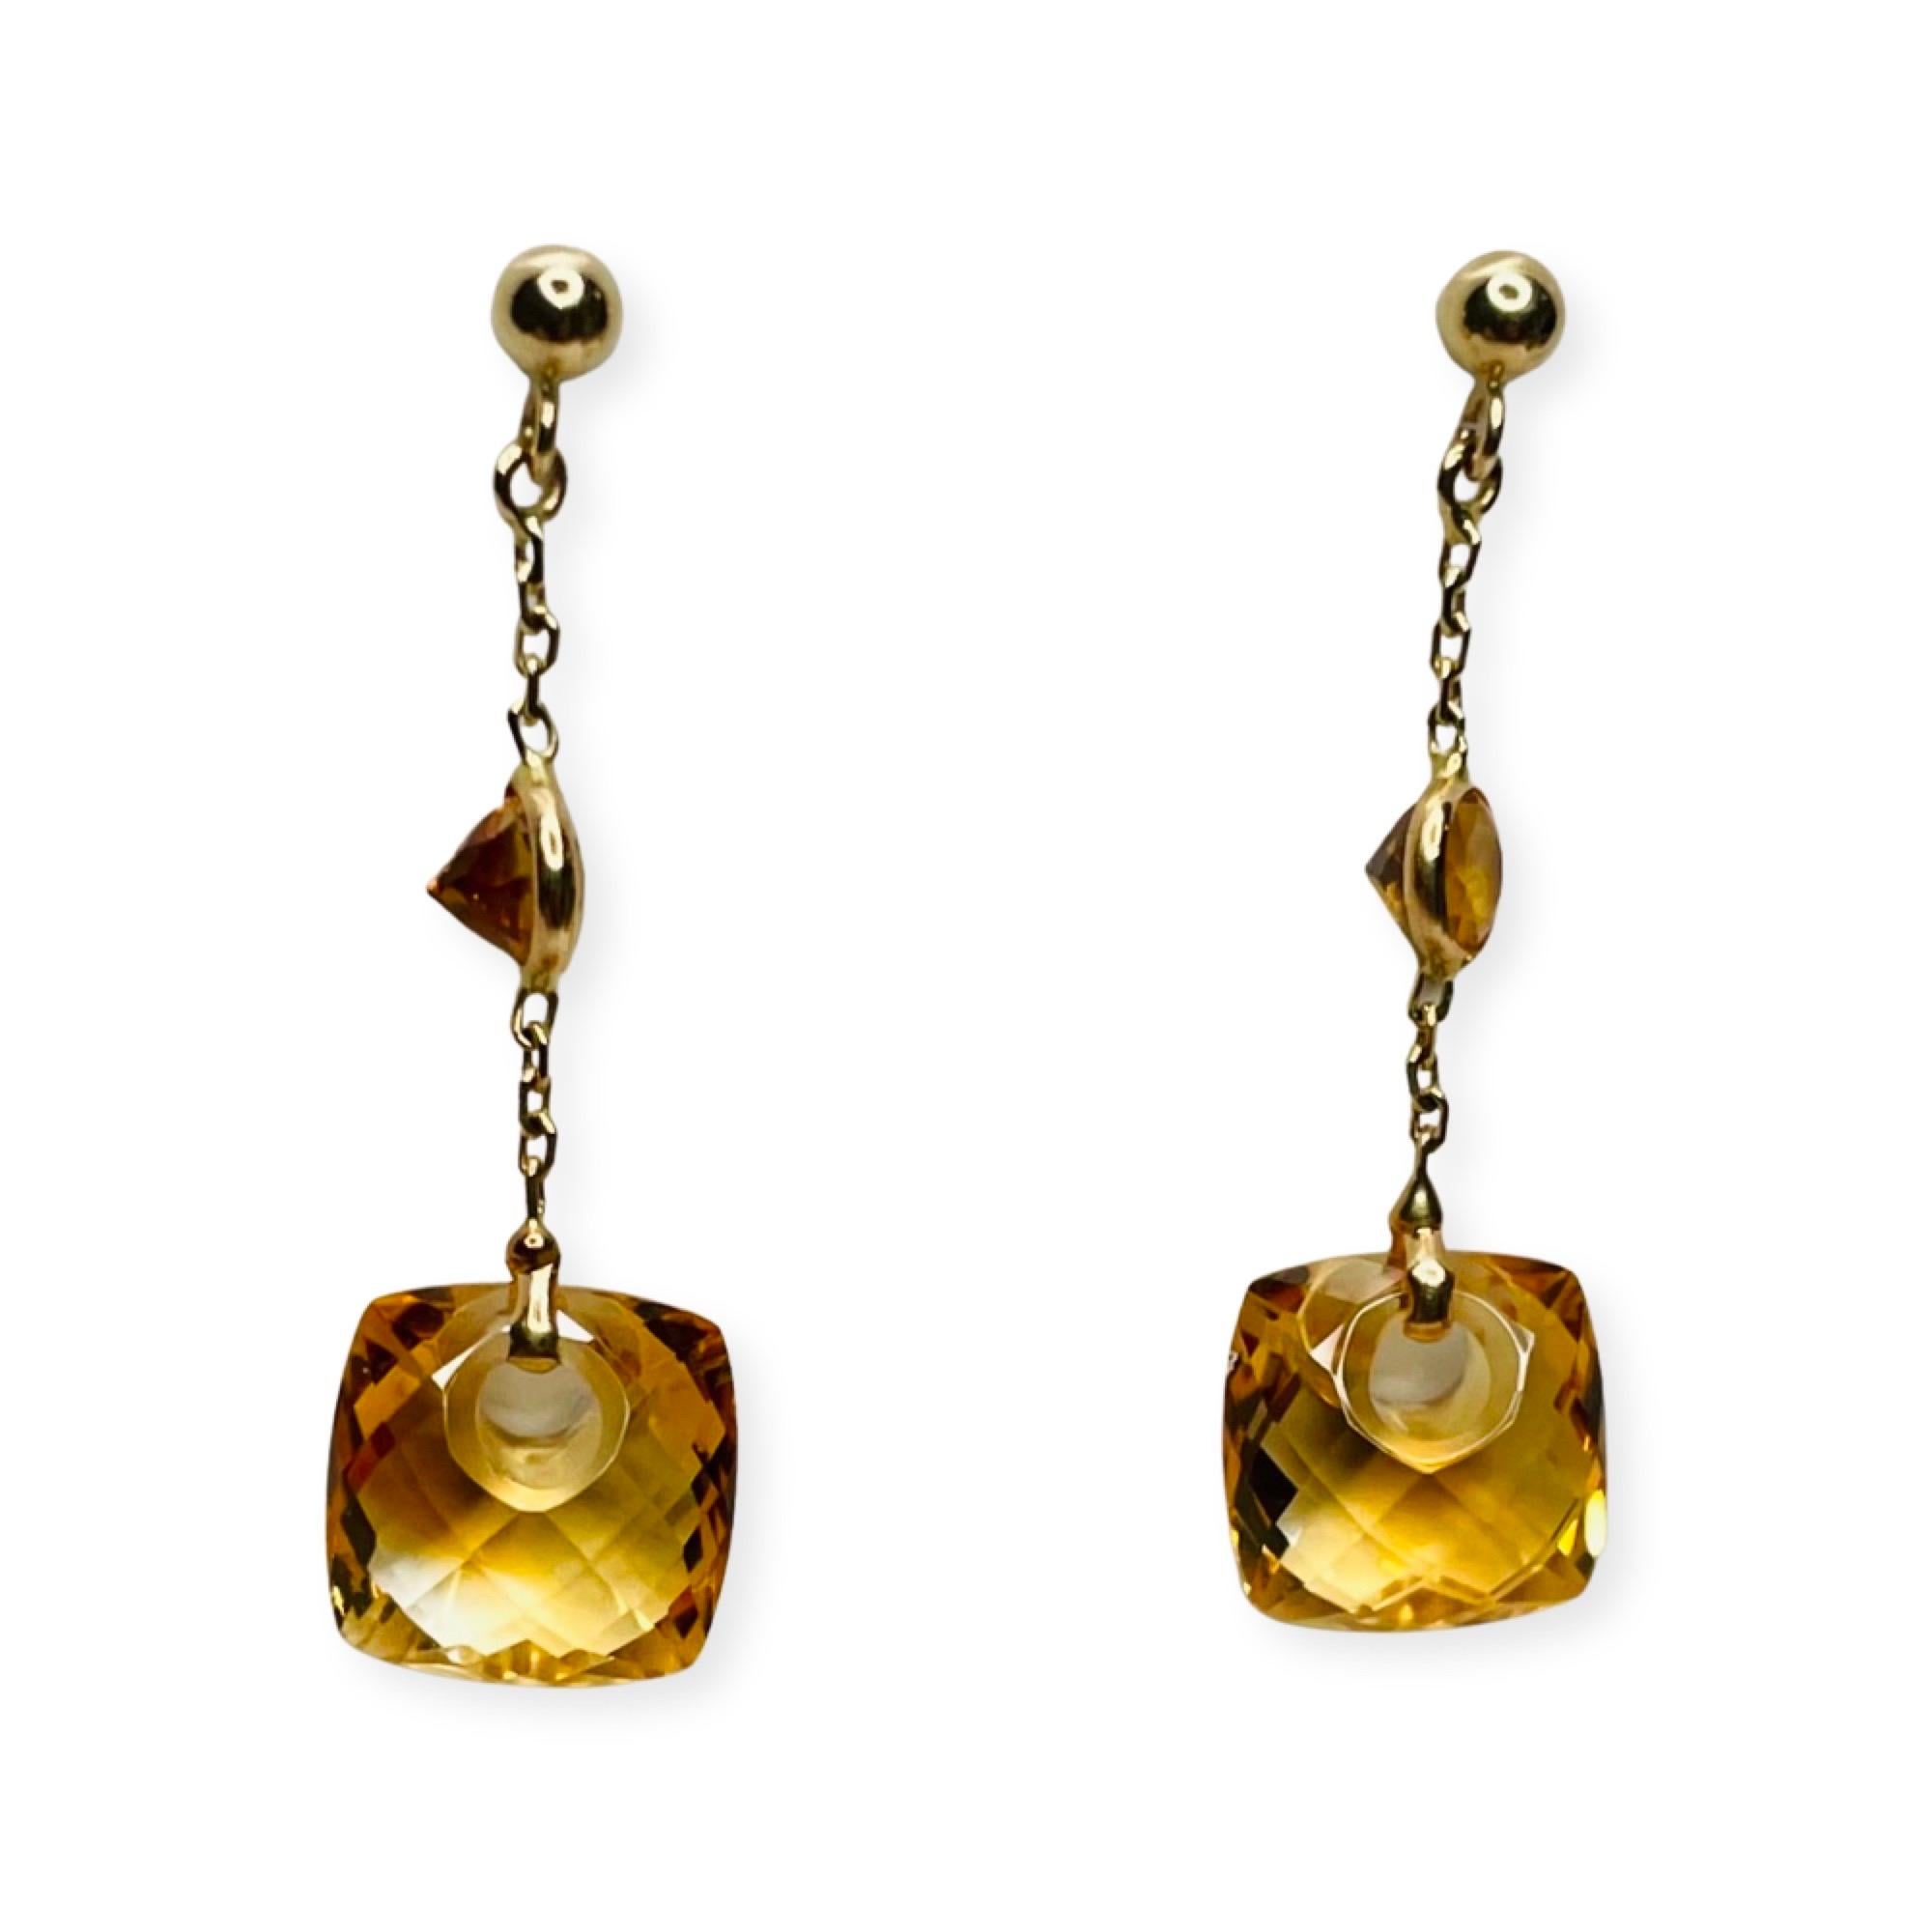 Lithos 14K Yellow Gold Citrine Earrings. There is a total citrine weight of 6.5 carats. The earrings are 31.42 mm long. They have gold balls with posts.  There is a bezel set citrine in the center of the chain.  The bottom citrine is laser drilled